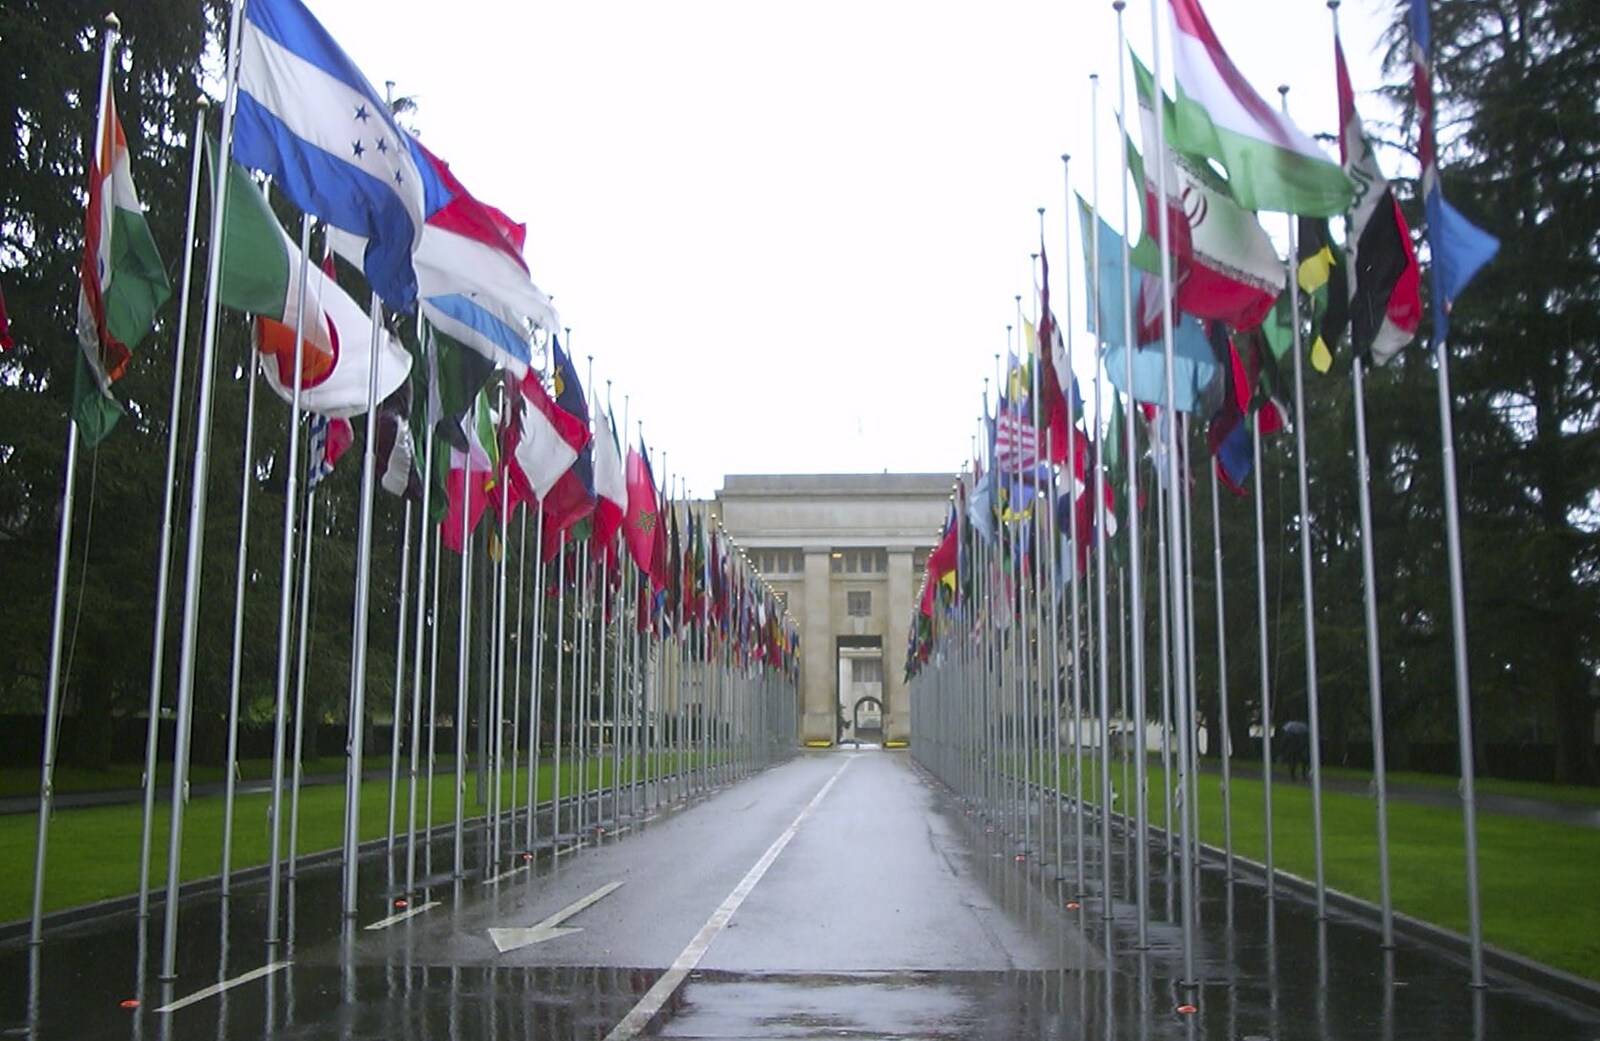 A row of flags at the United Nations from Nosher in Geneva, Switzerland - 17th March 2002